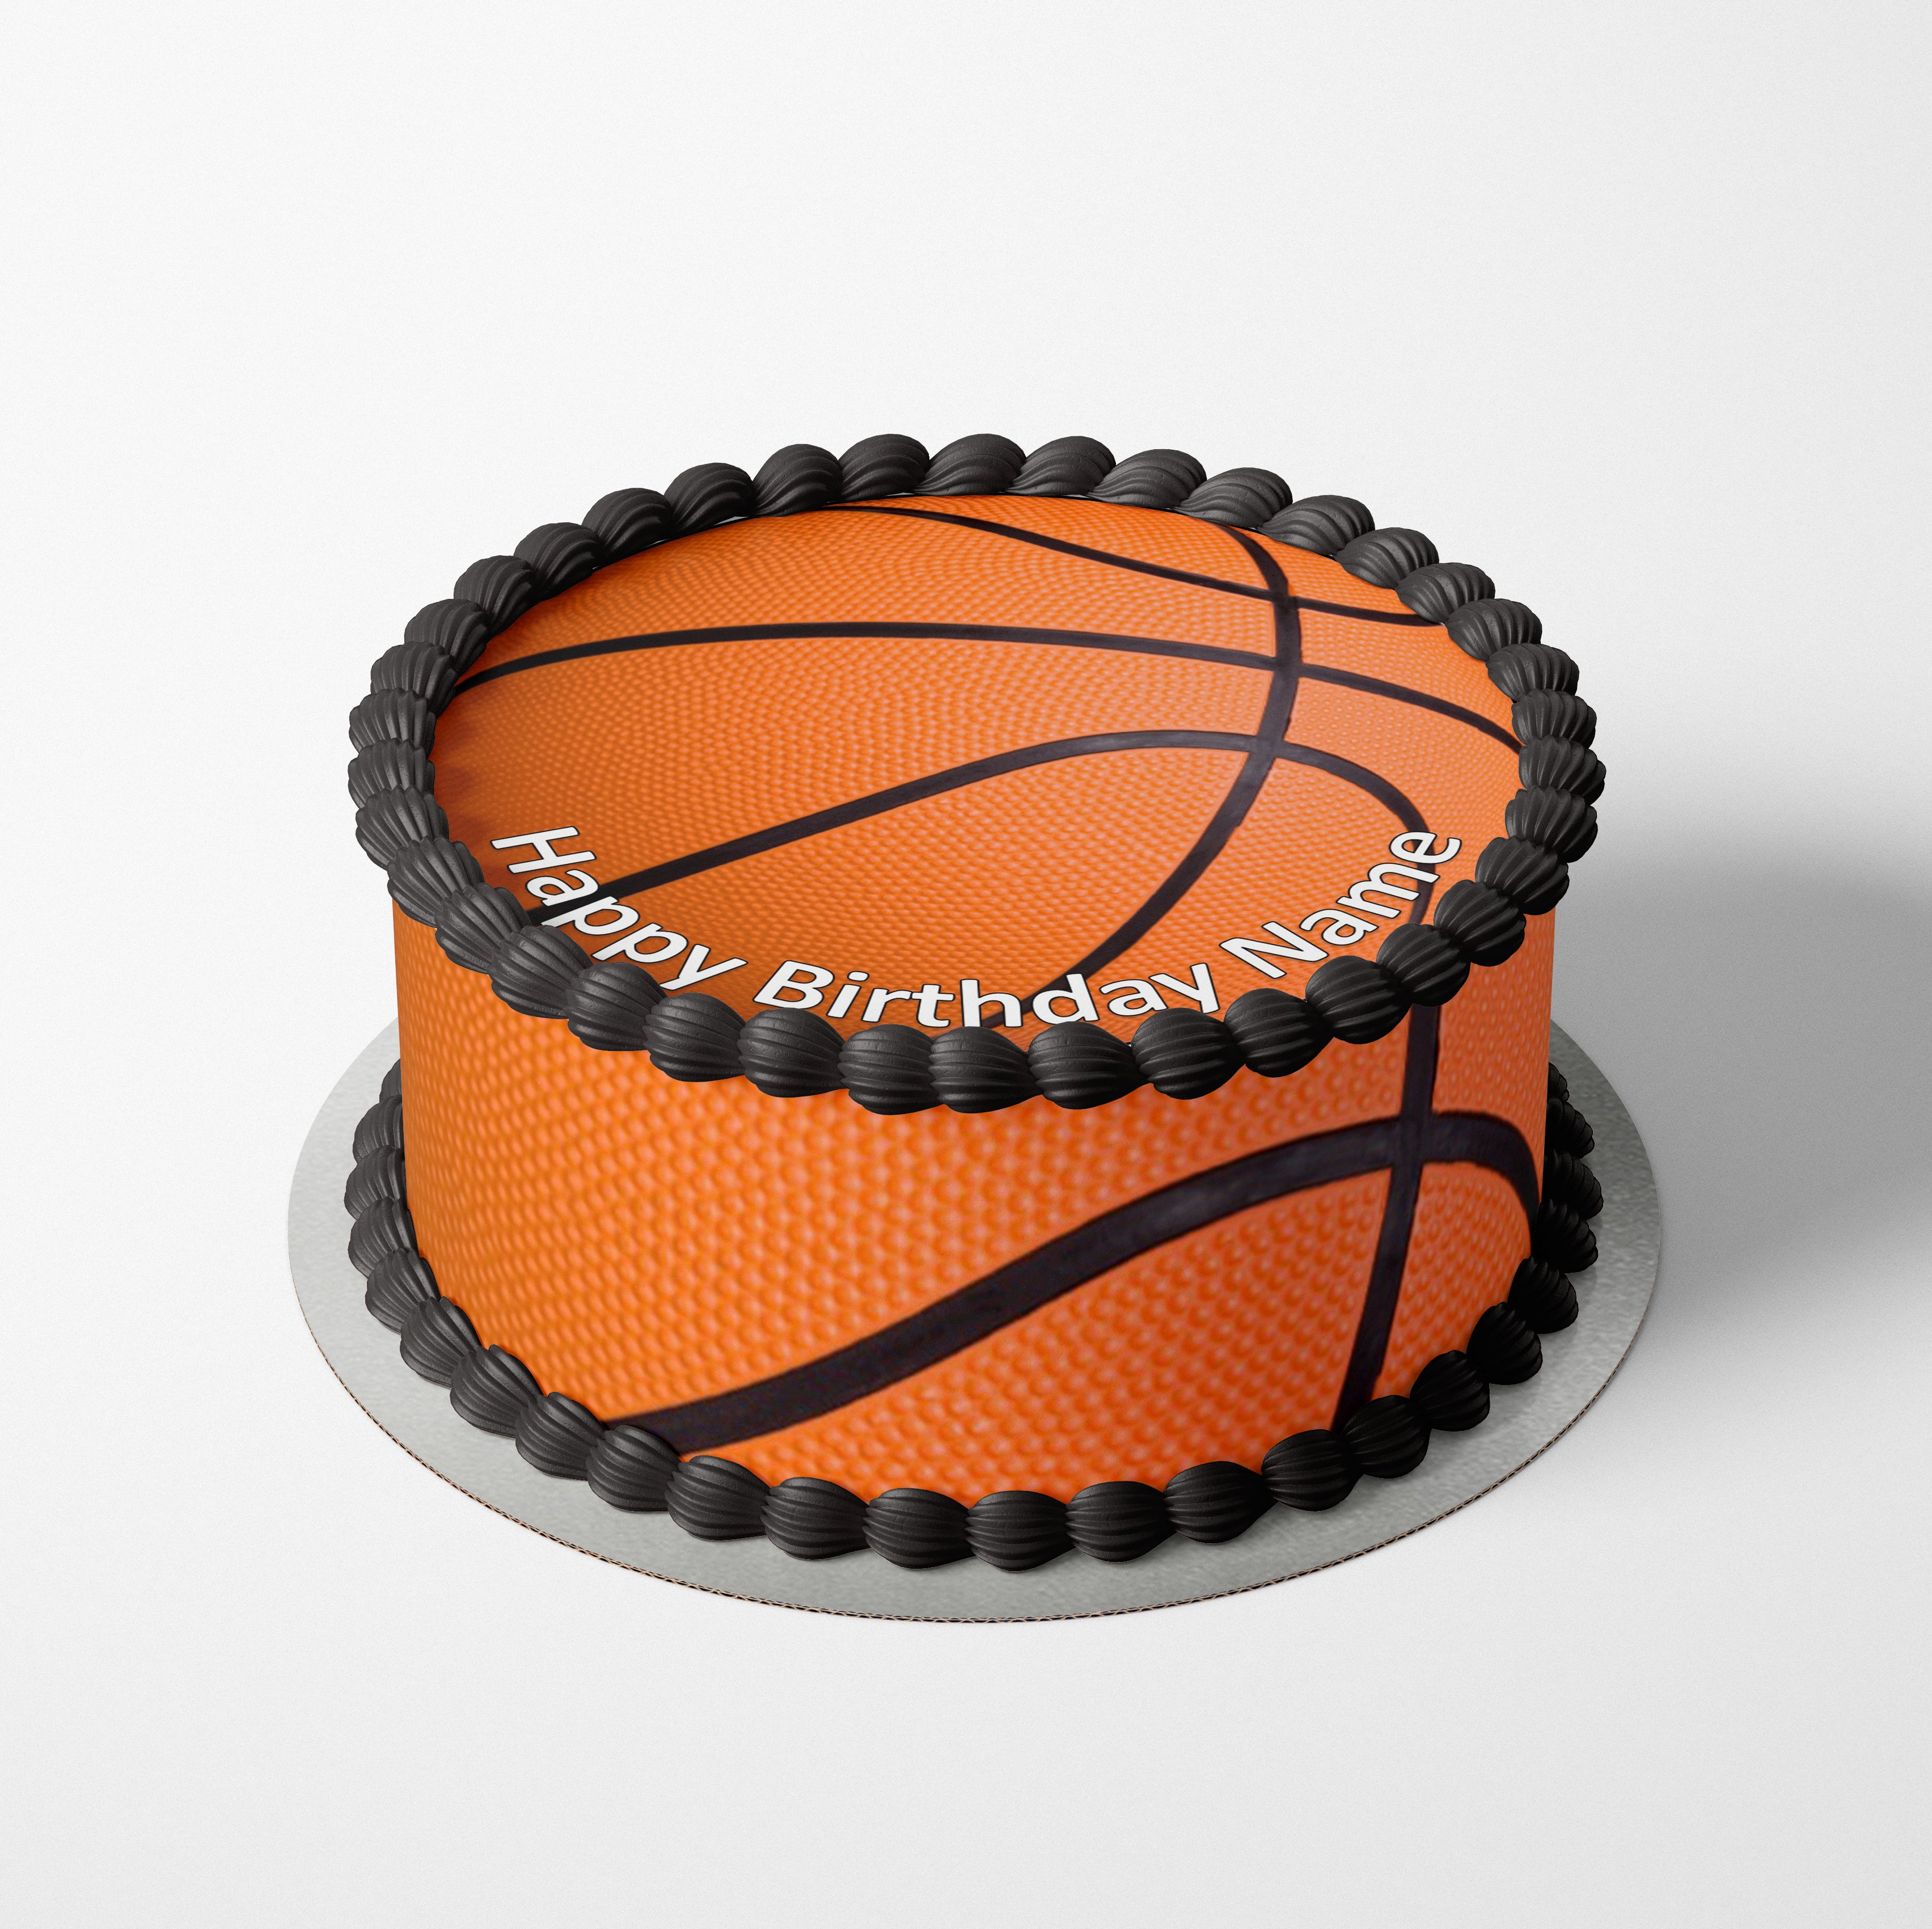 Jay Basketball – Celebration Cakes- Cakes and Decorating Supplies, NZ